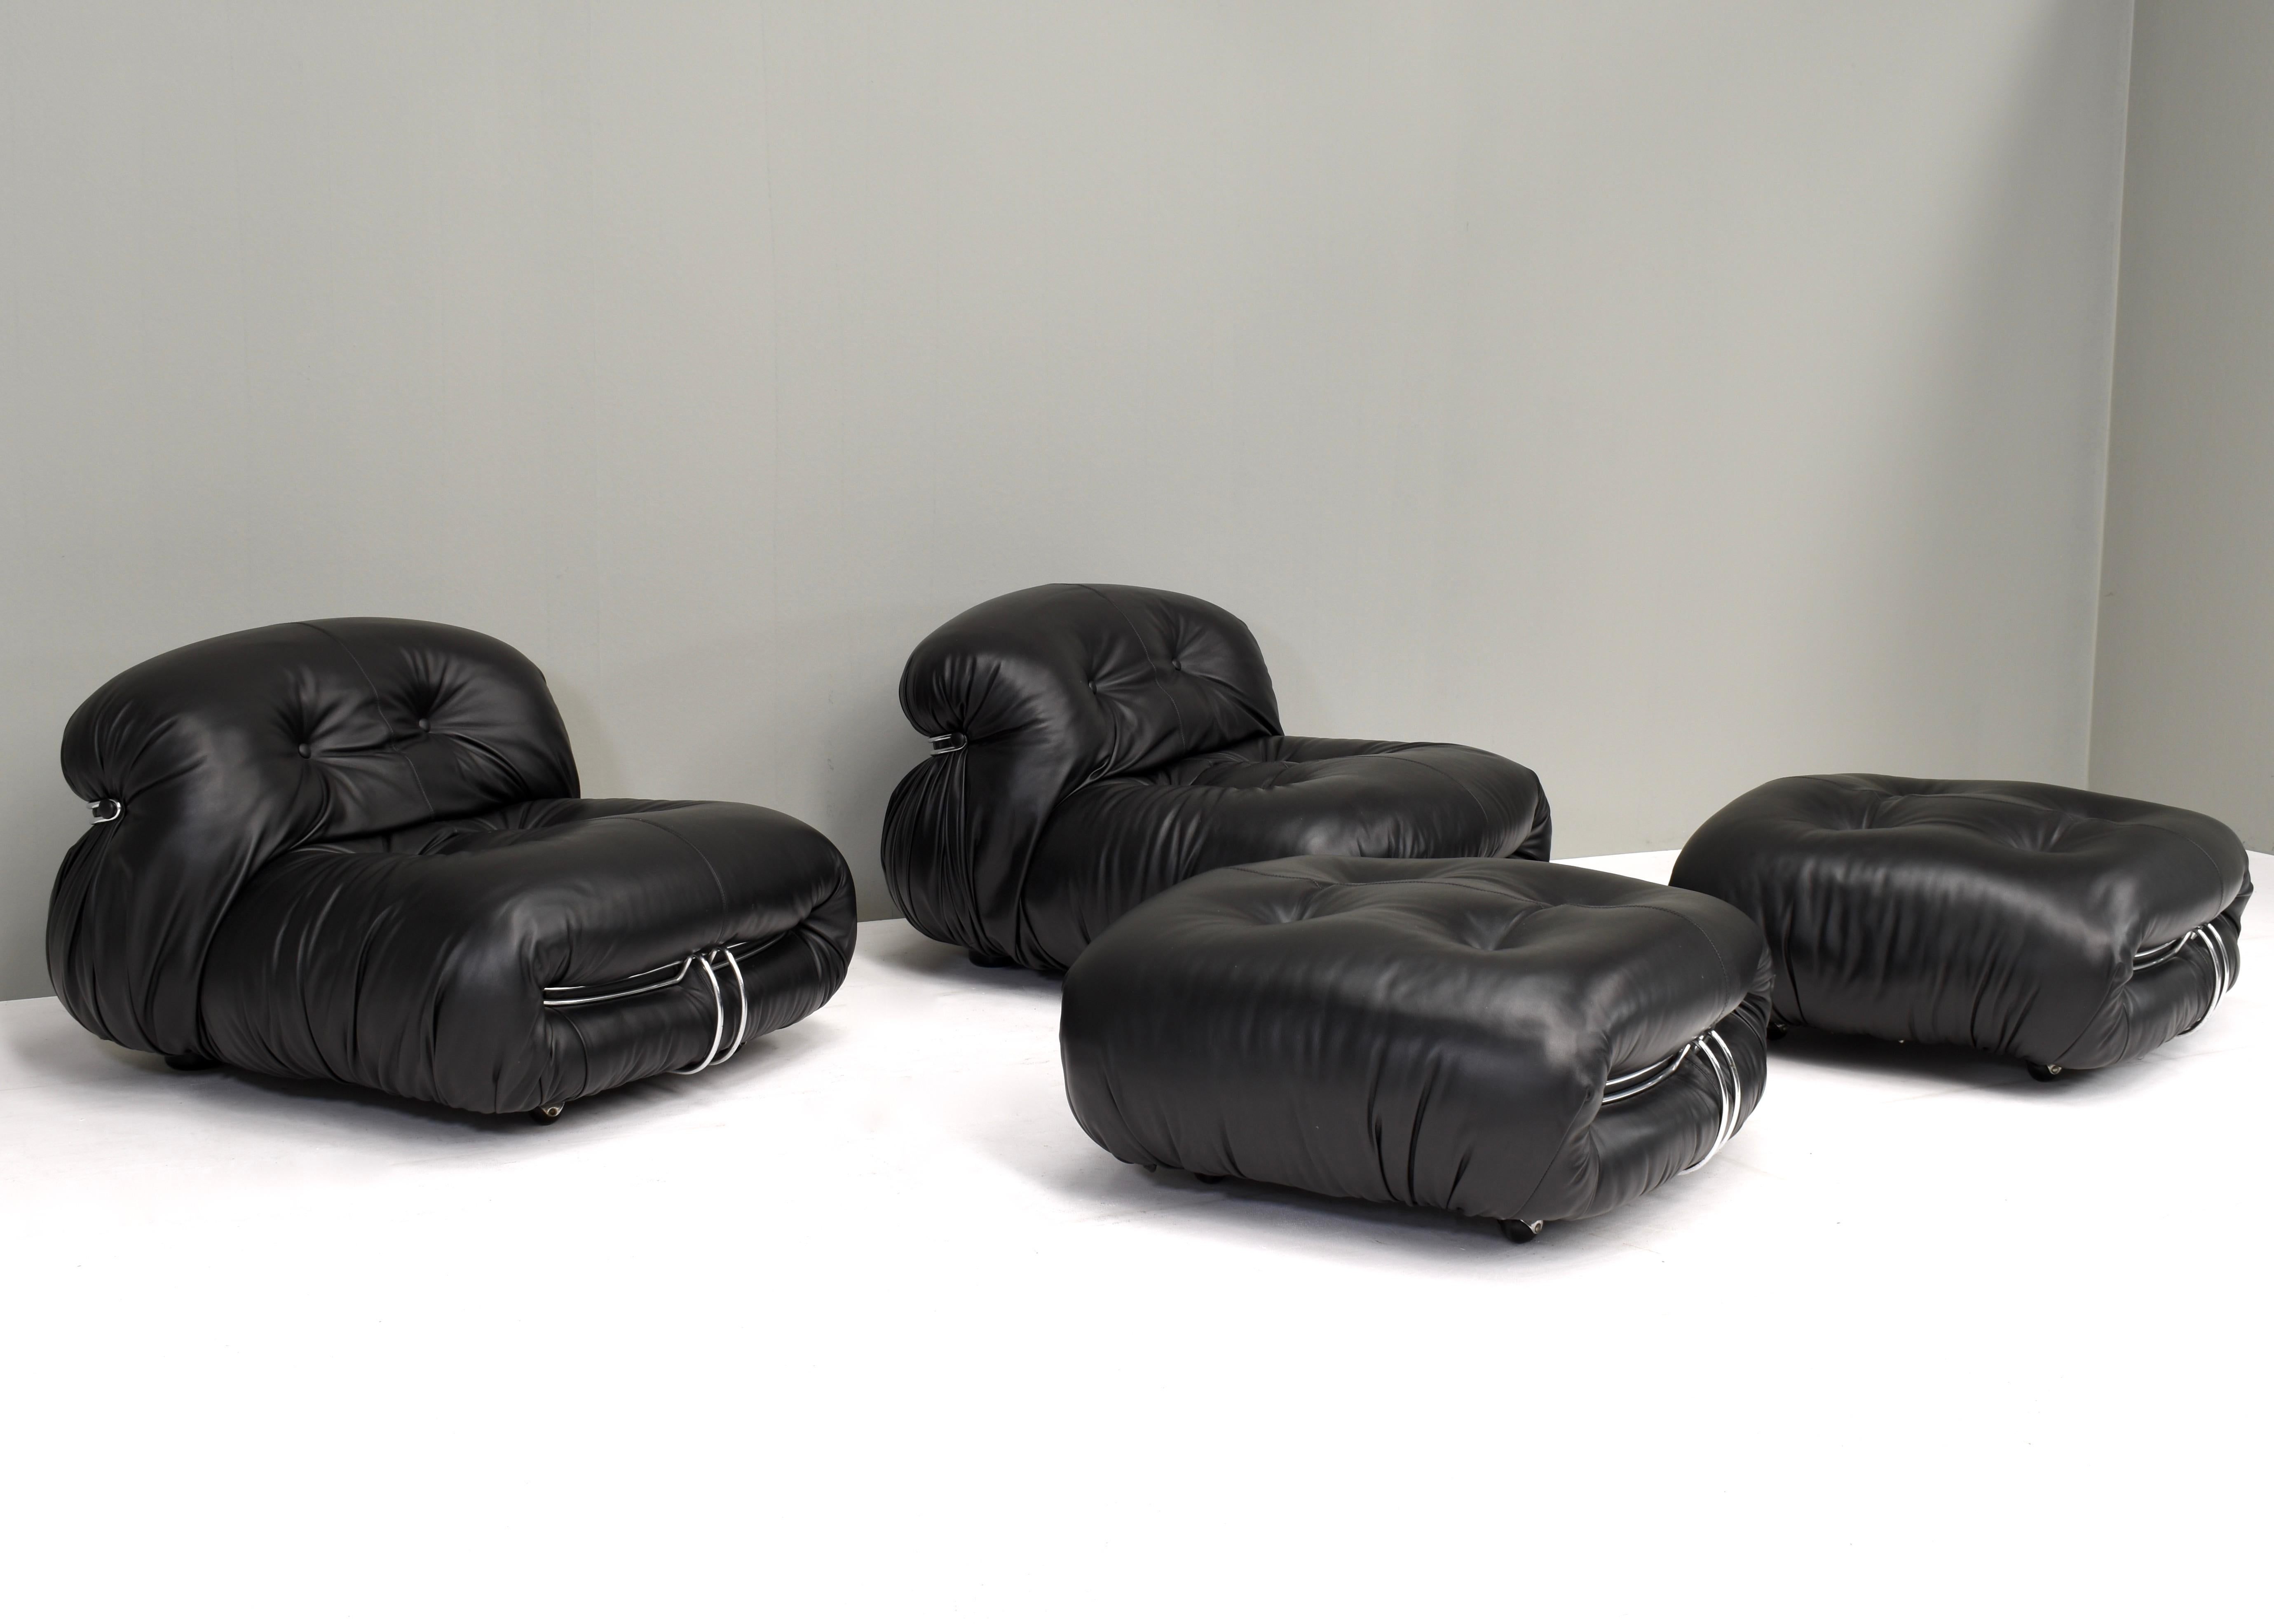 Soriana Chair and Ottoman by Tobia Scarpa for Cassina Black Leather, Italy, 1969 For Sale 12